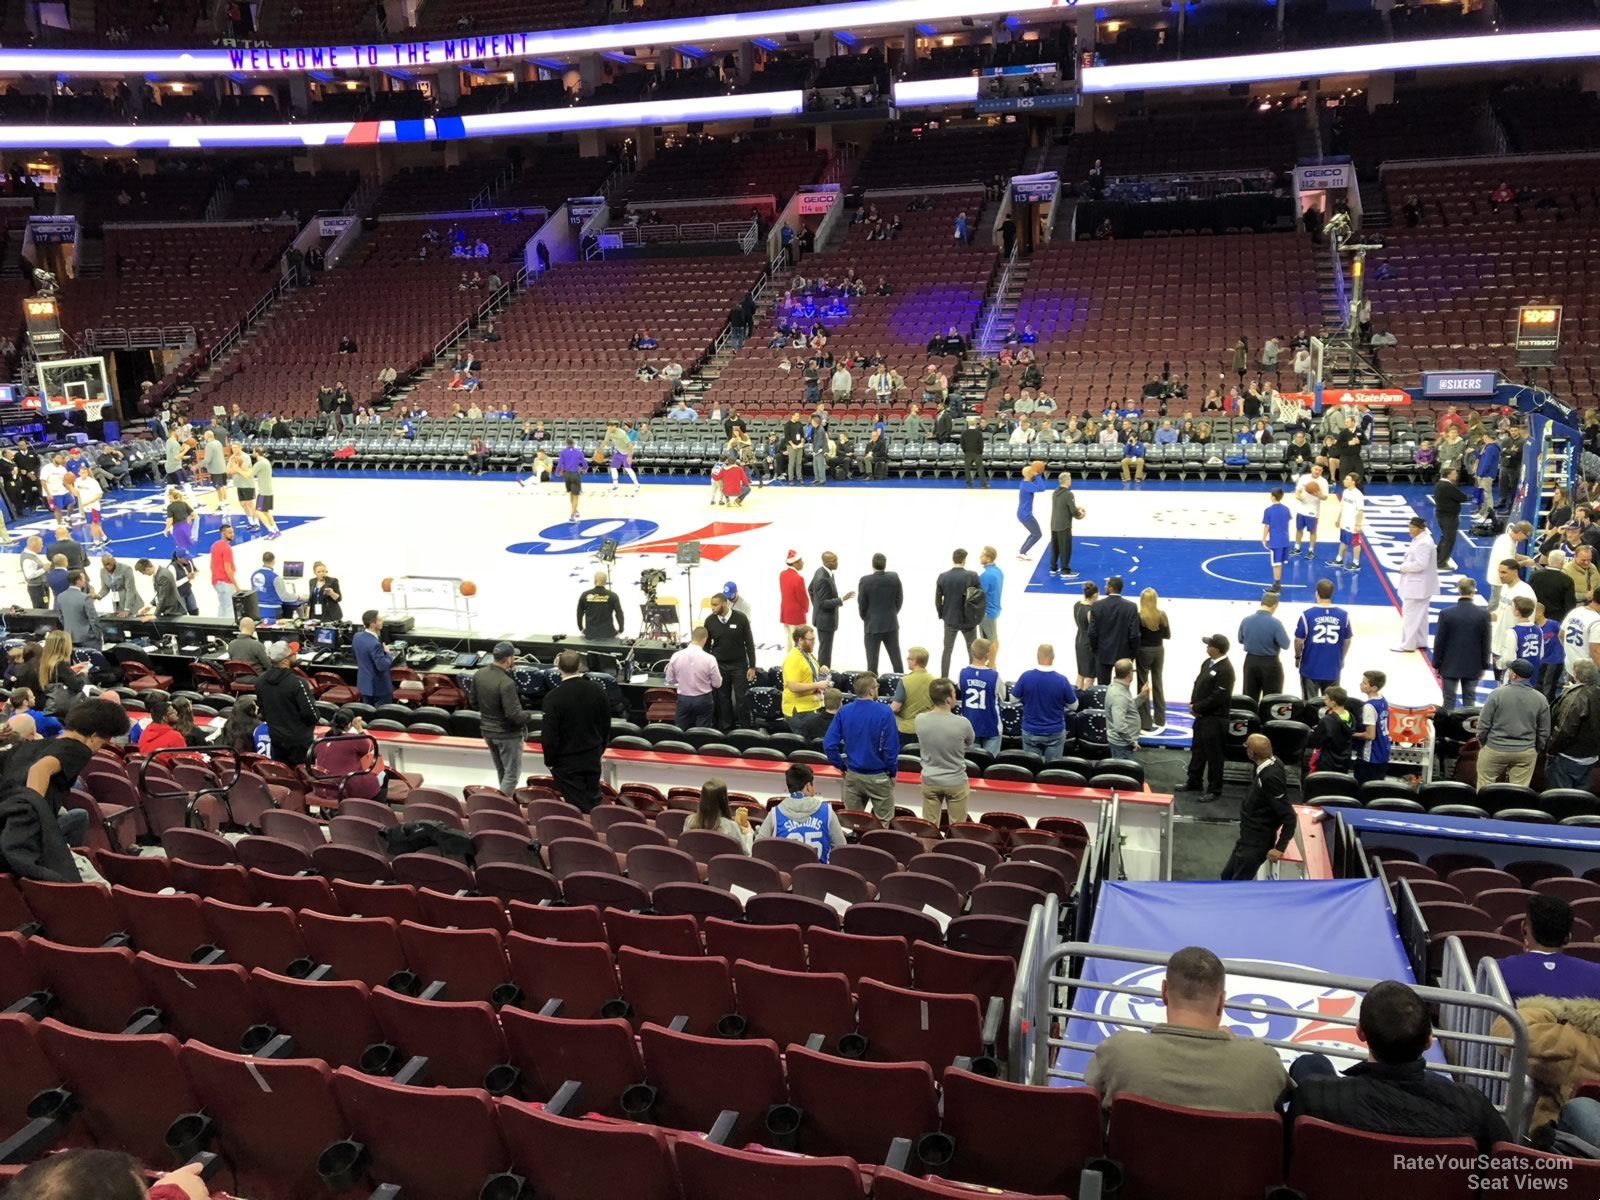 Wells Fargo Seating Chart For Sixers Games